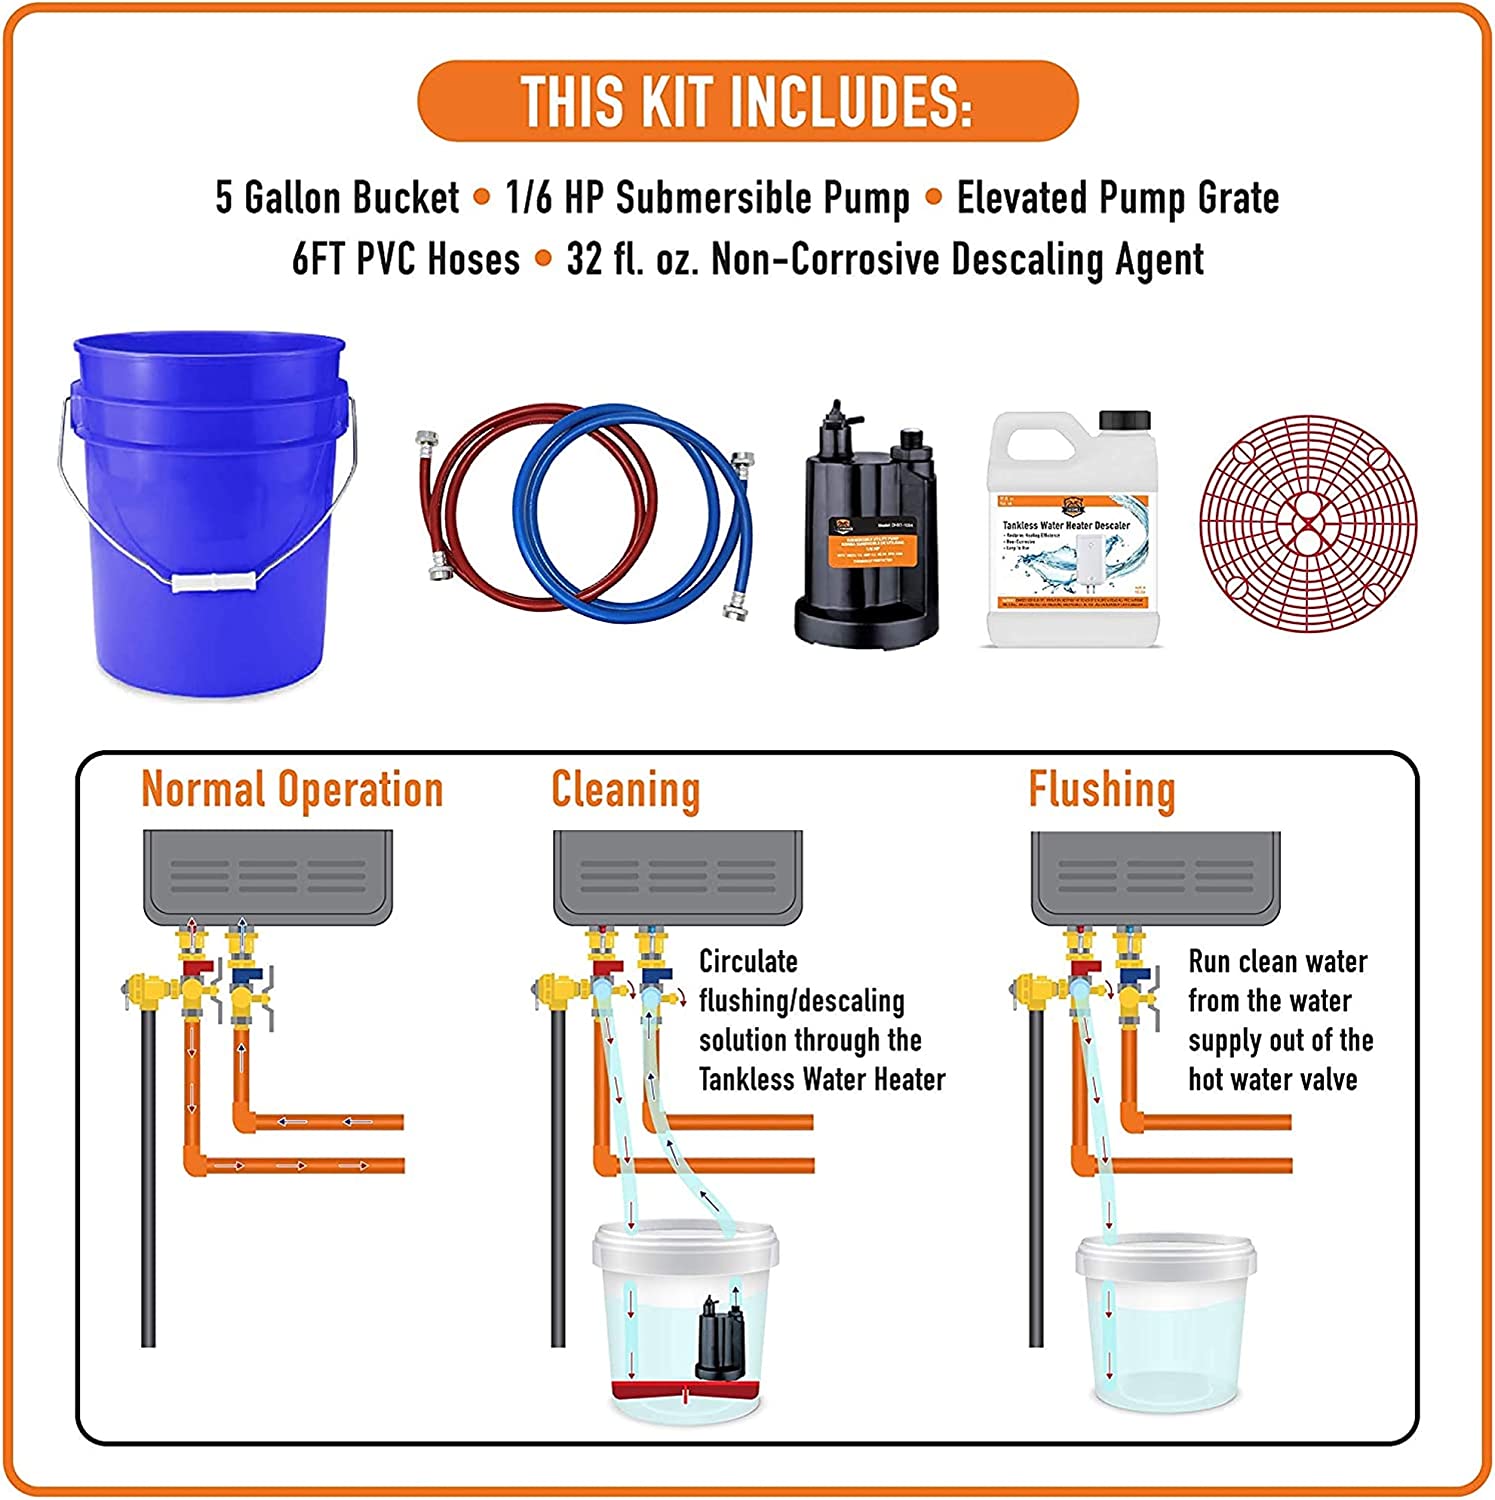 Chromex Tankless Water Heater Flush Kit with Certified Liquid Descaling Solution